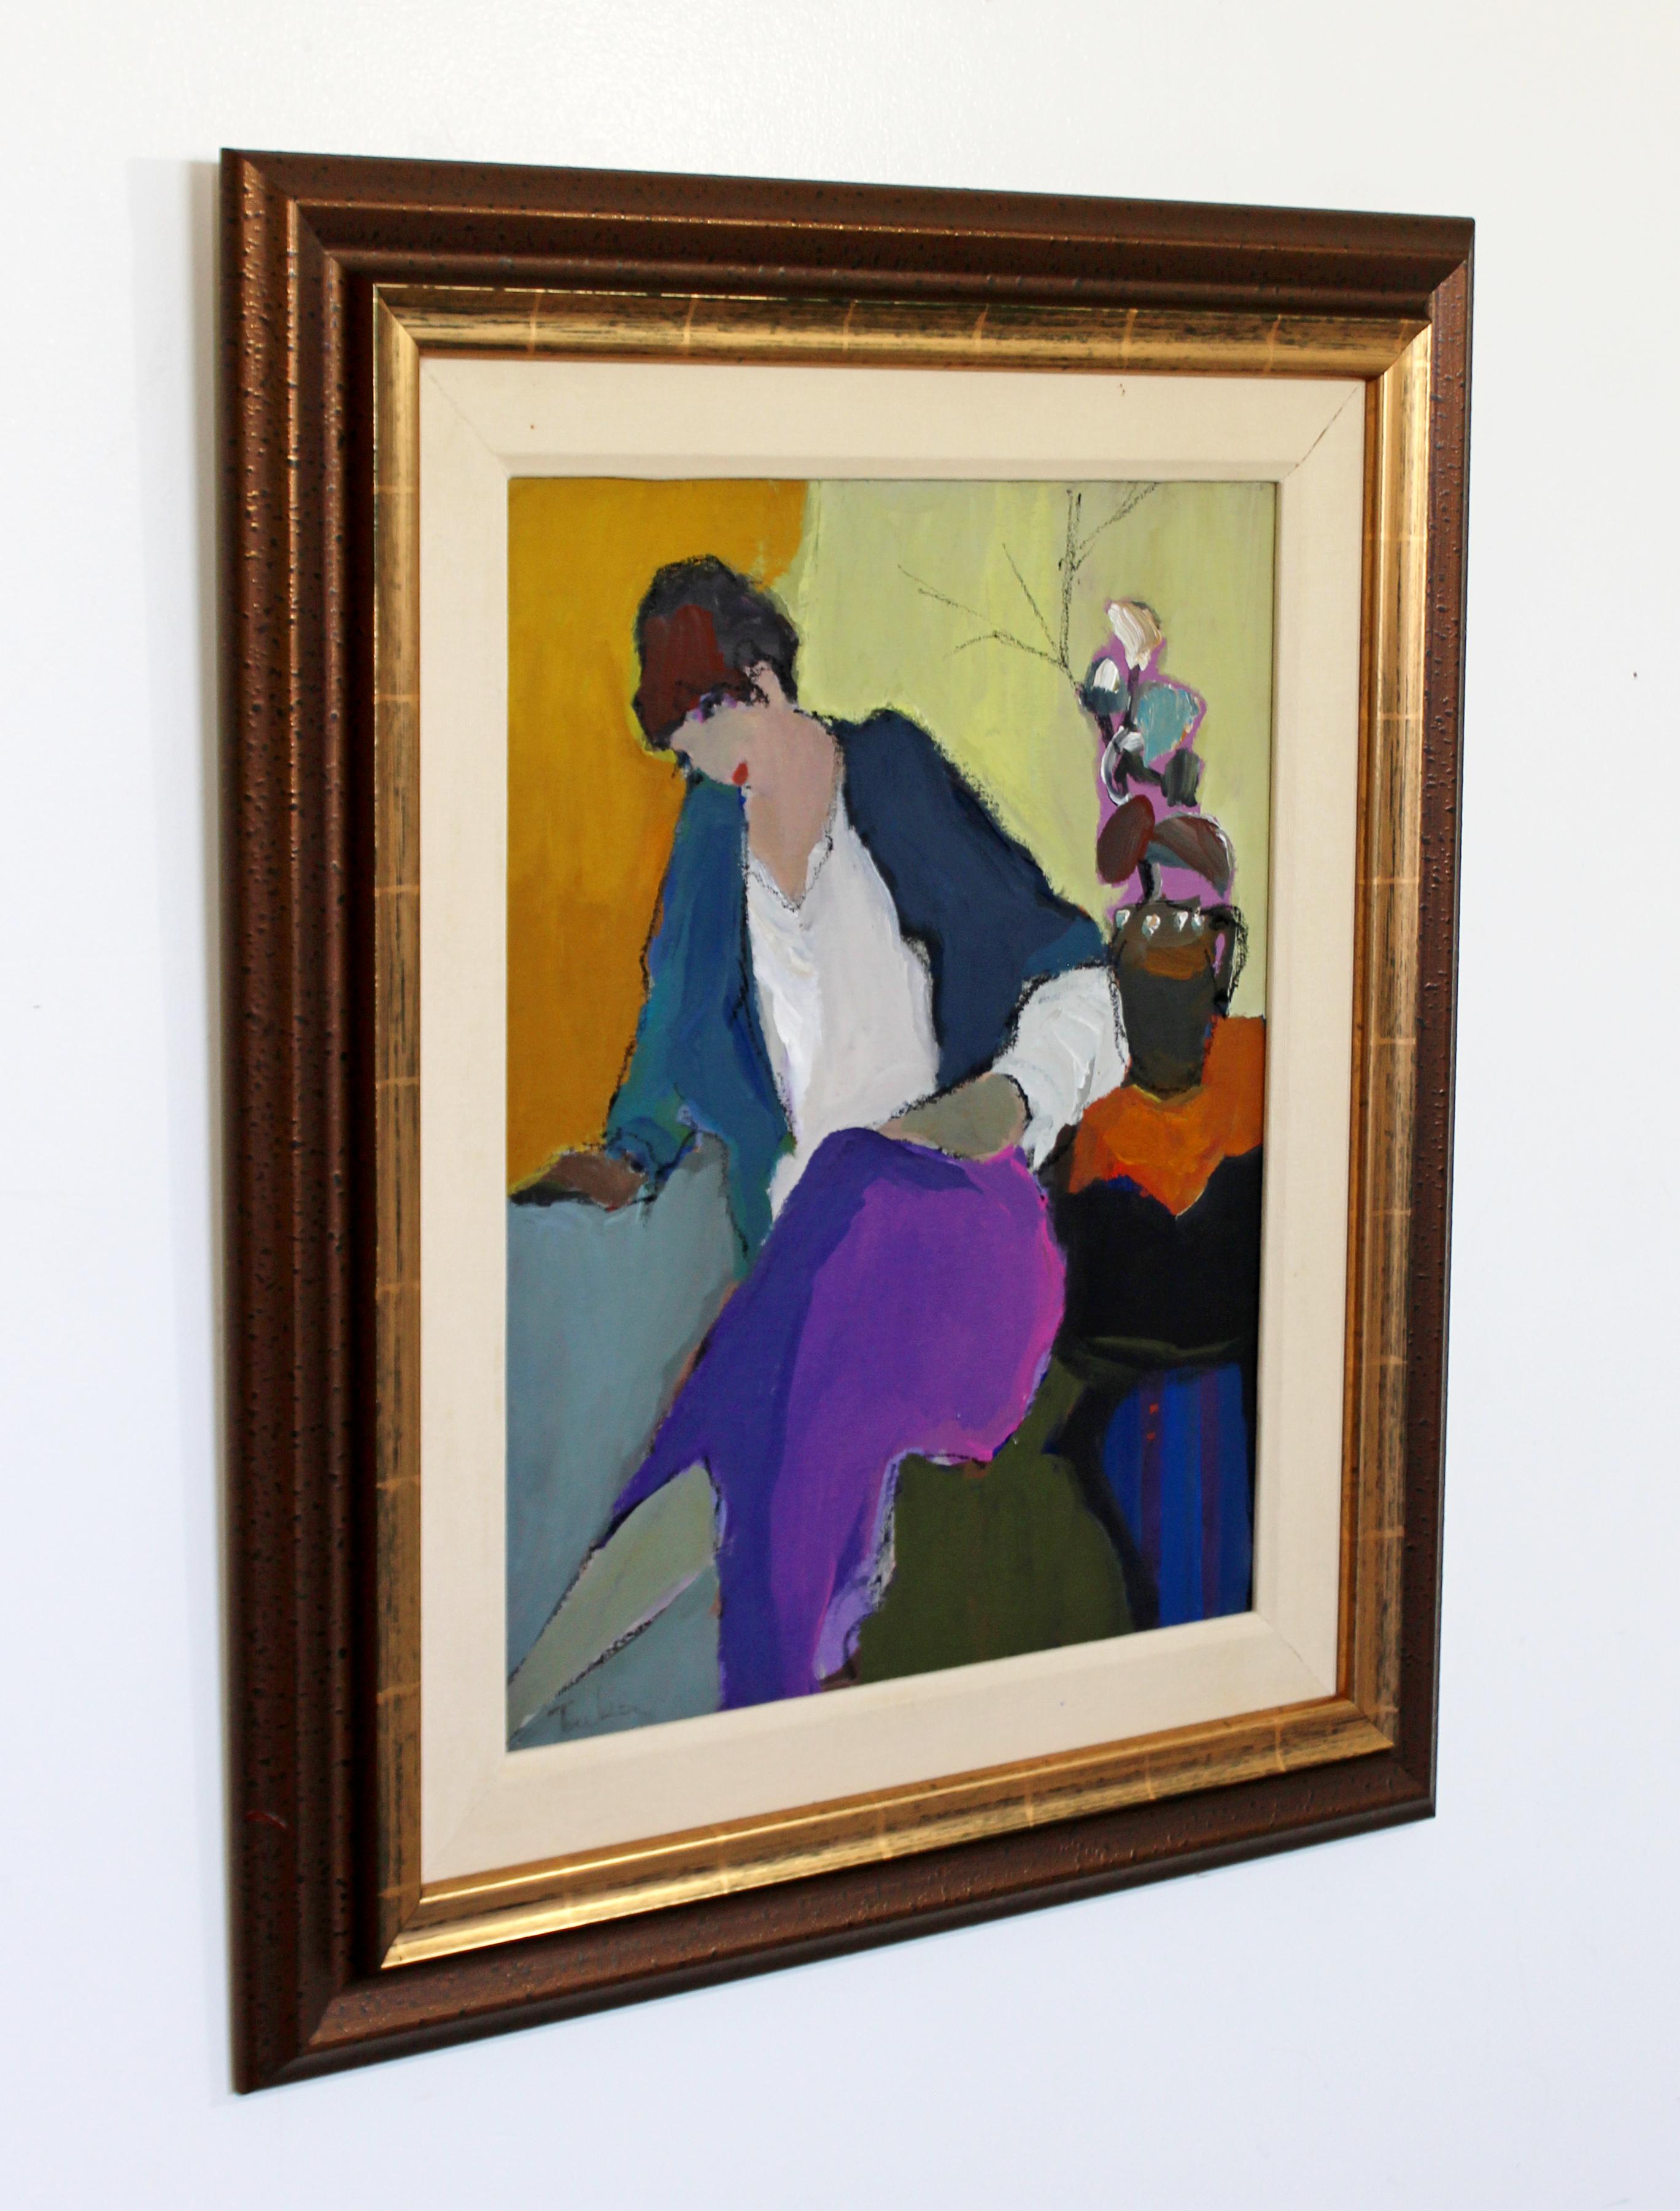 Fabulous acrylic on canvas painting, signed by artist in black frame with gold rope. Itzchak Tarkay is considered to be a key figure in the modern figurative movement. Artwork by the Israeli artist are easily recognizable and captures people and